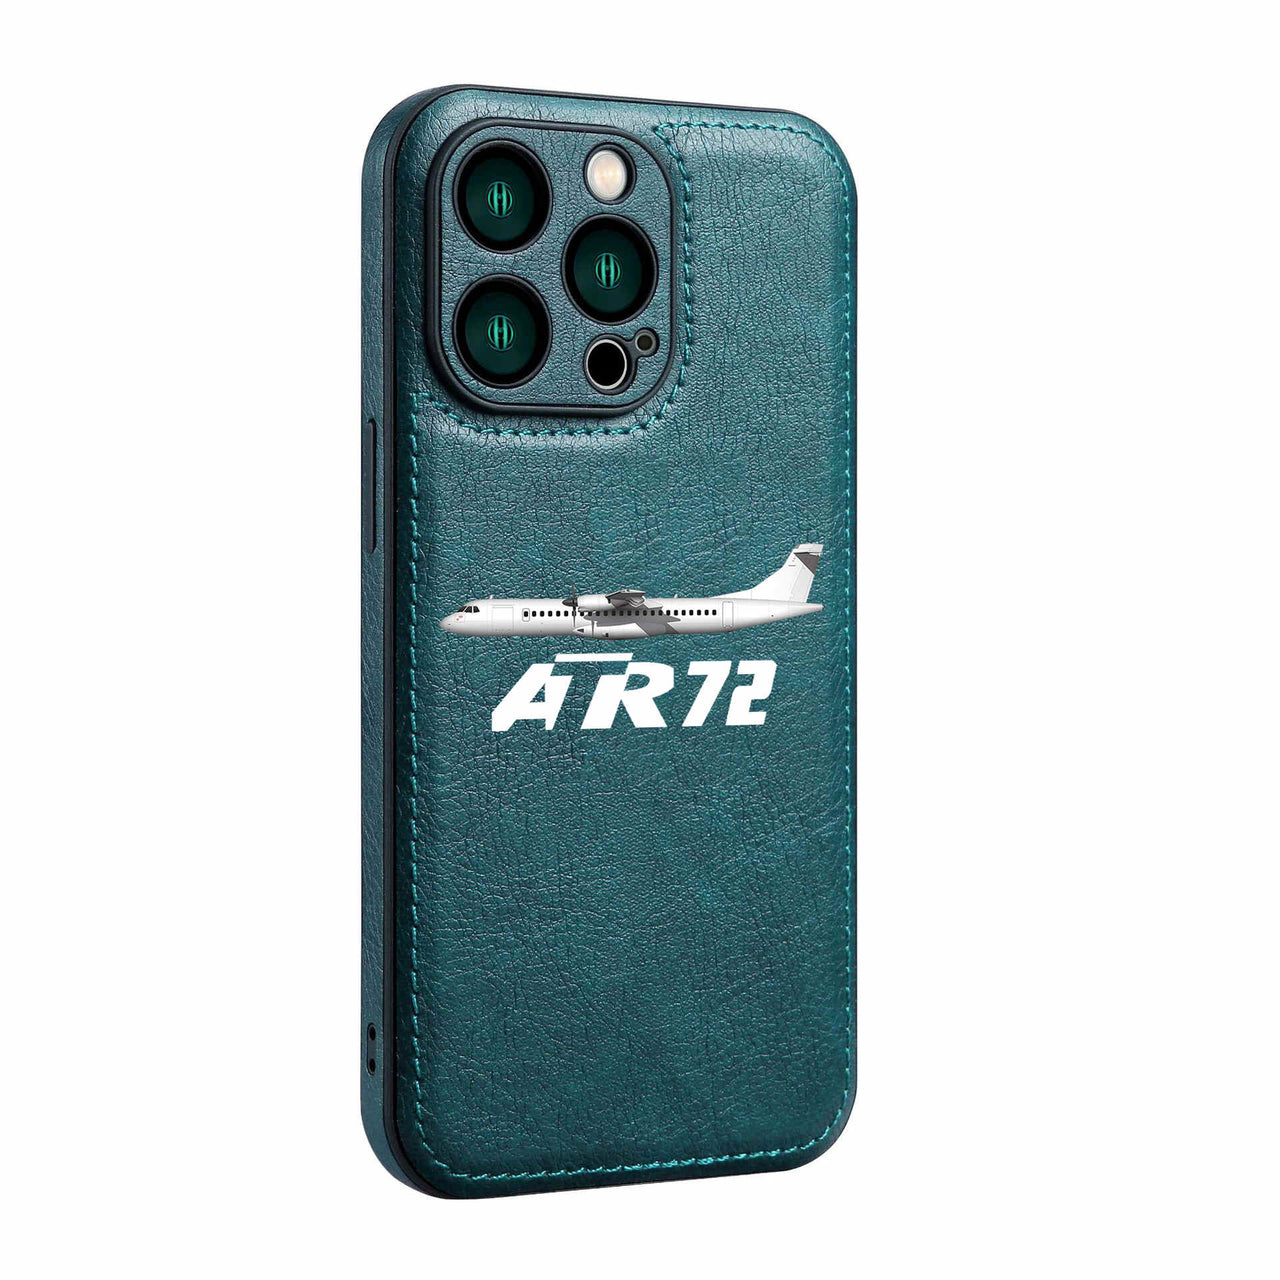 The ATR72 Designed Leather iPhone Cases